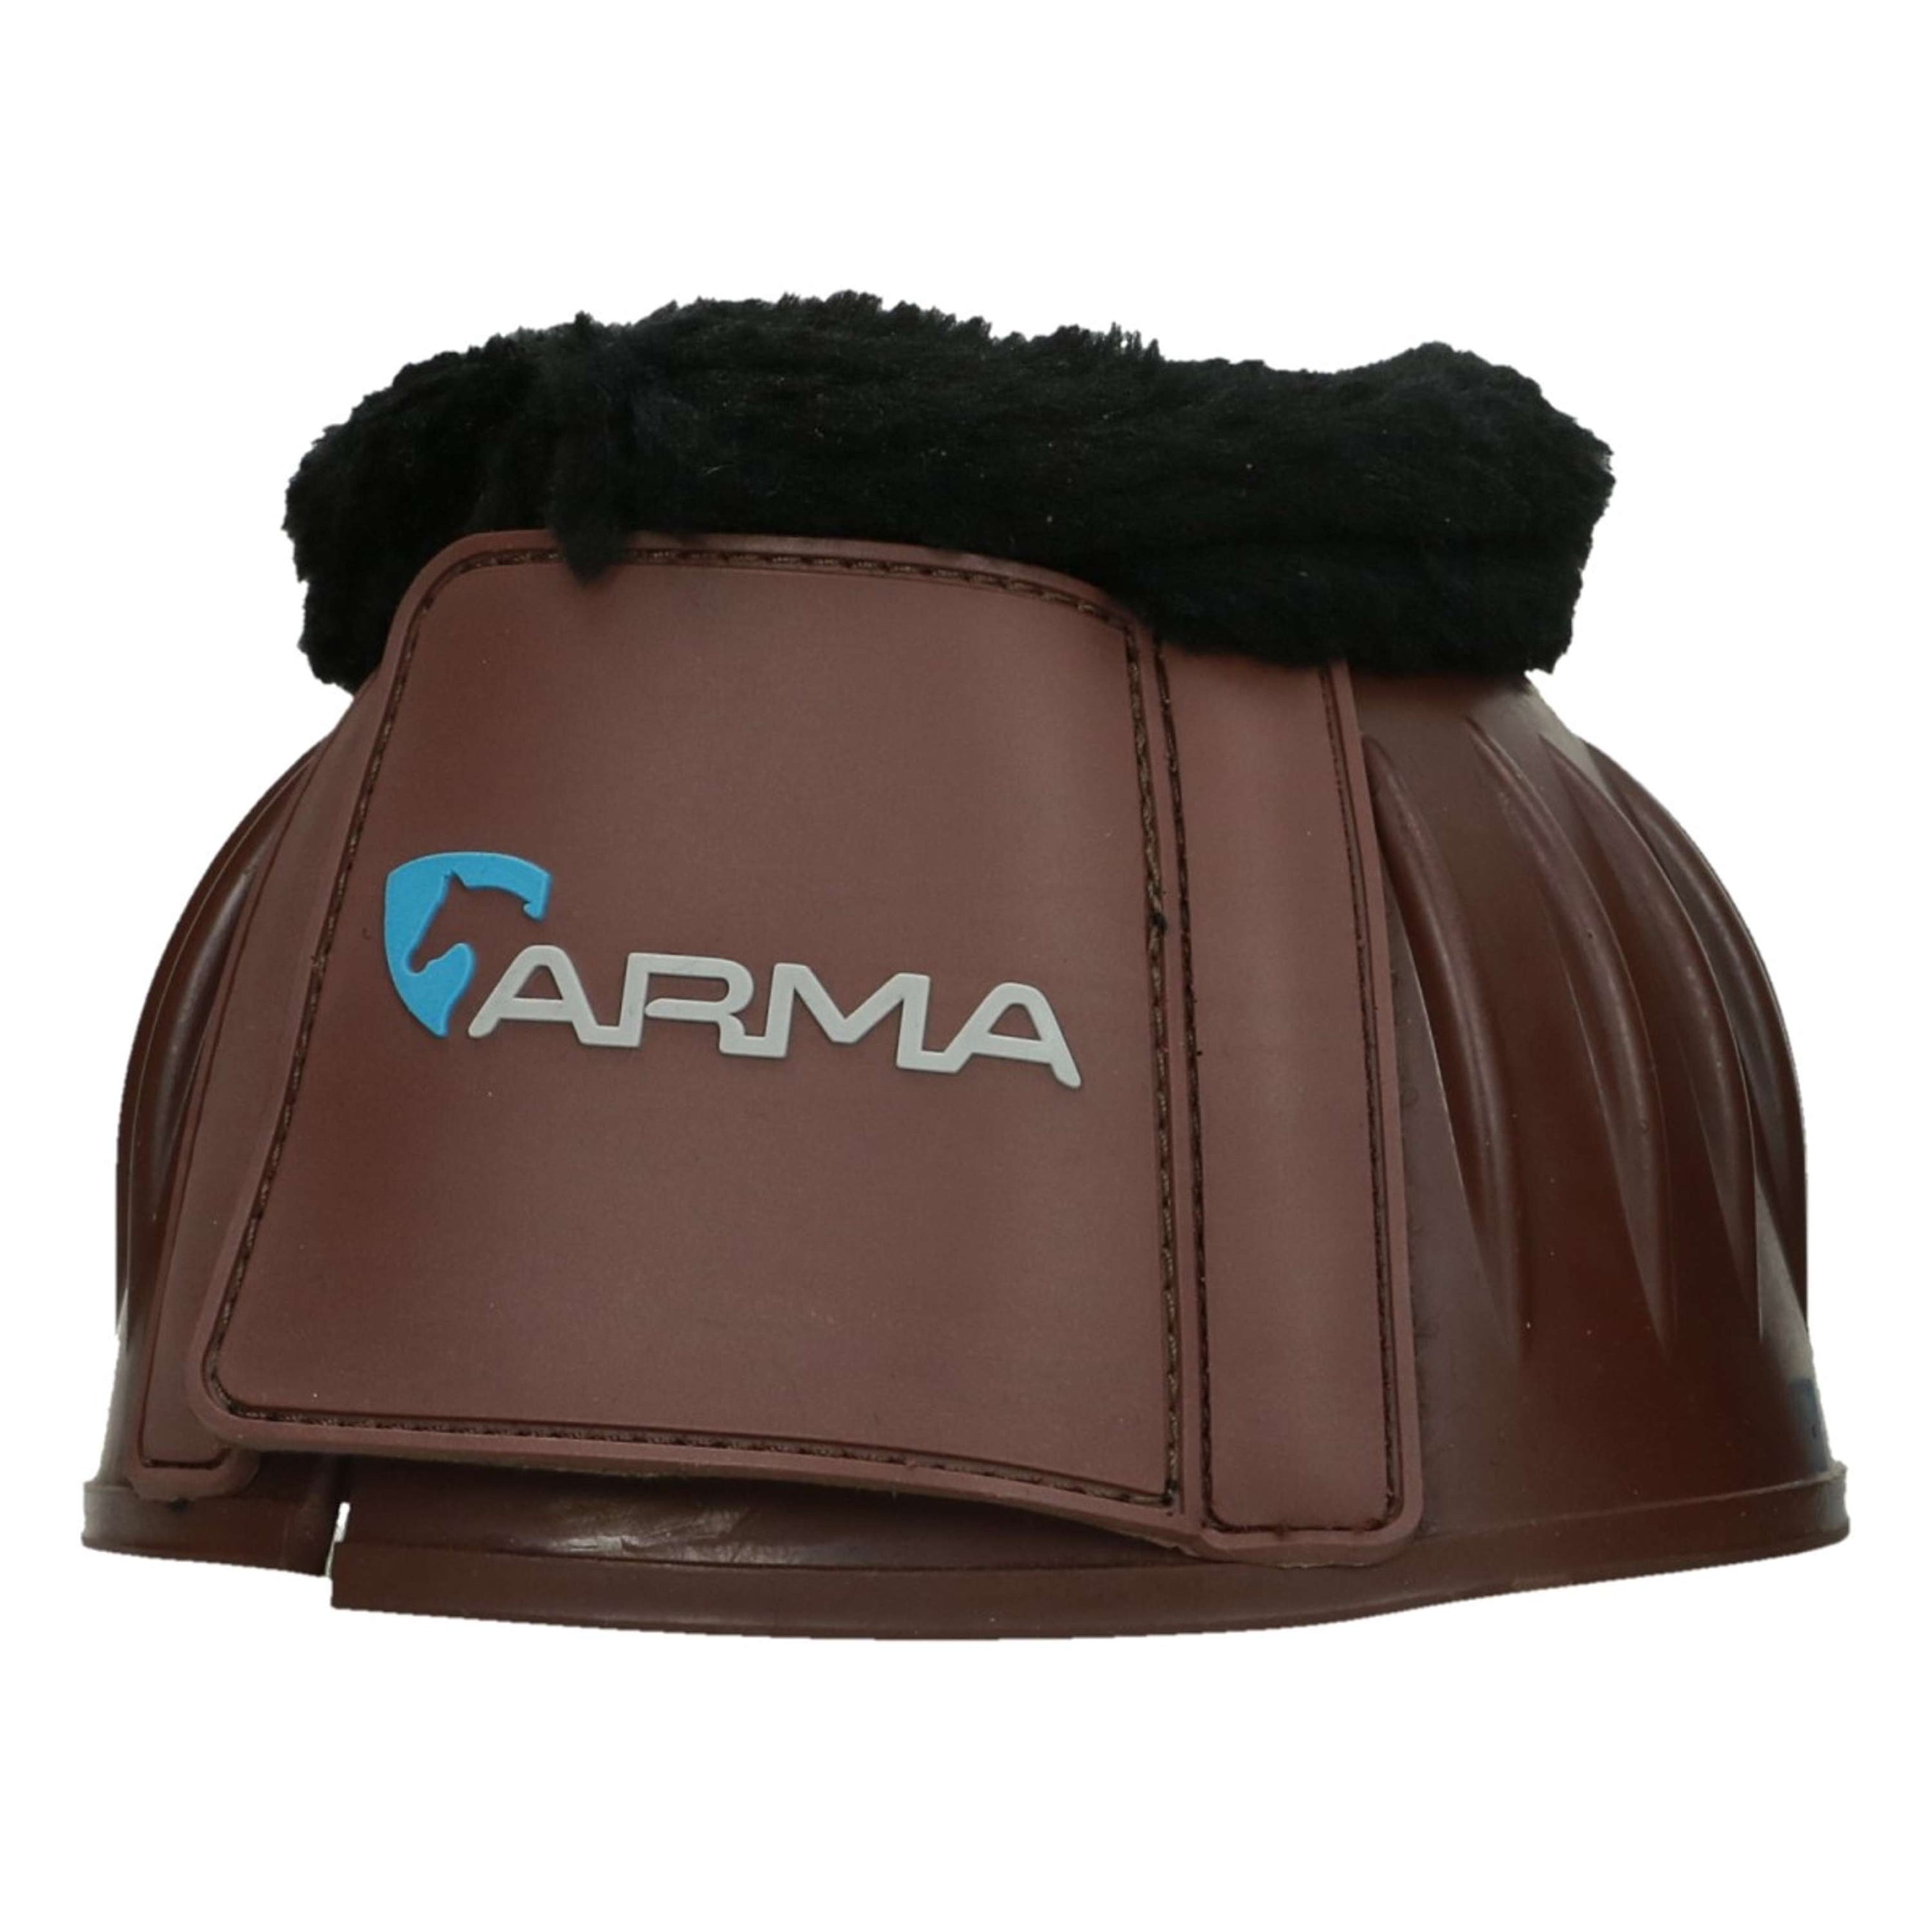 Arma by Shires Cloches d'Obstacles Molleton Noir Marron